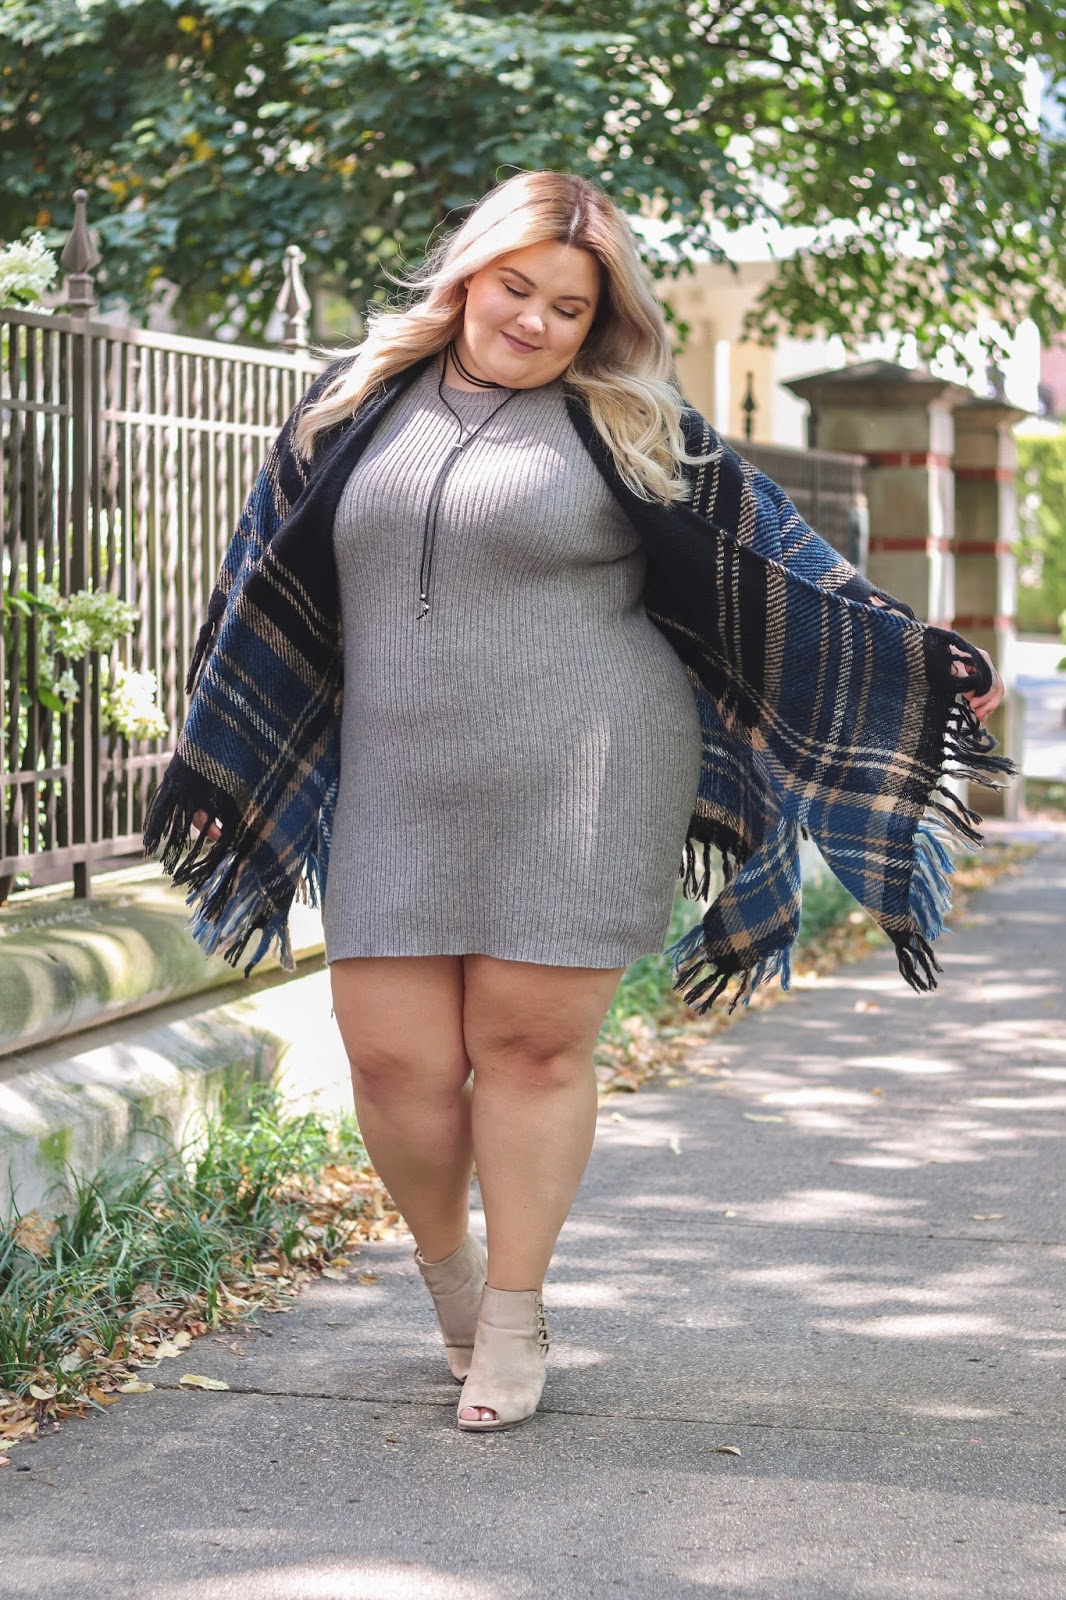 natalie in the city, thigh society, plus size fashion, Chicago fashion blogger, plus size Chicago blogger, Chicago style, anti chafing shorts, anti chafe balm, chub rub, fall 2017 style, plus size sweater dresses, plus size fringe shawls, affordable plus size clothing, back to school plus size, curves and confidence